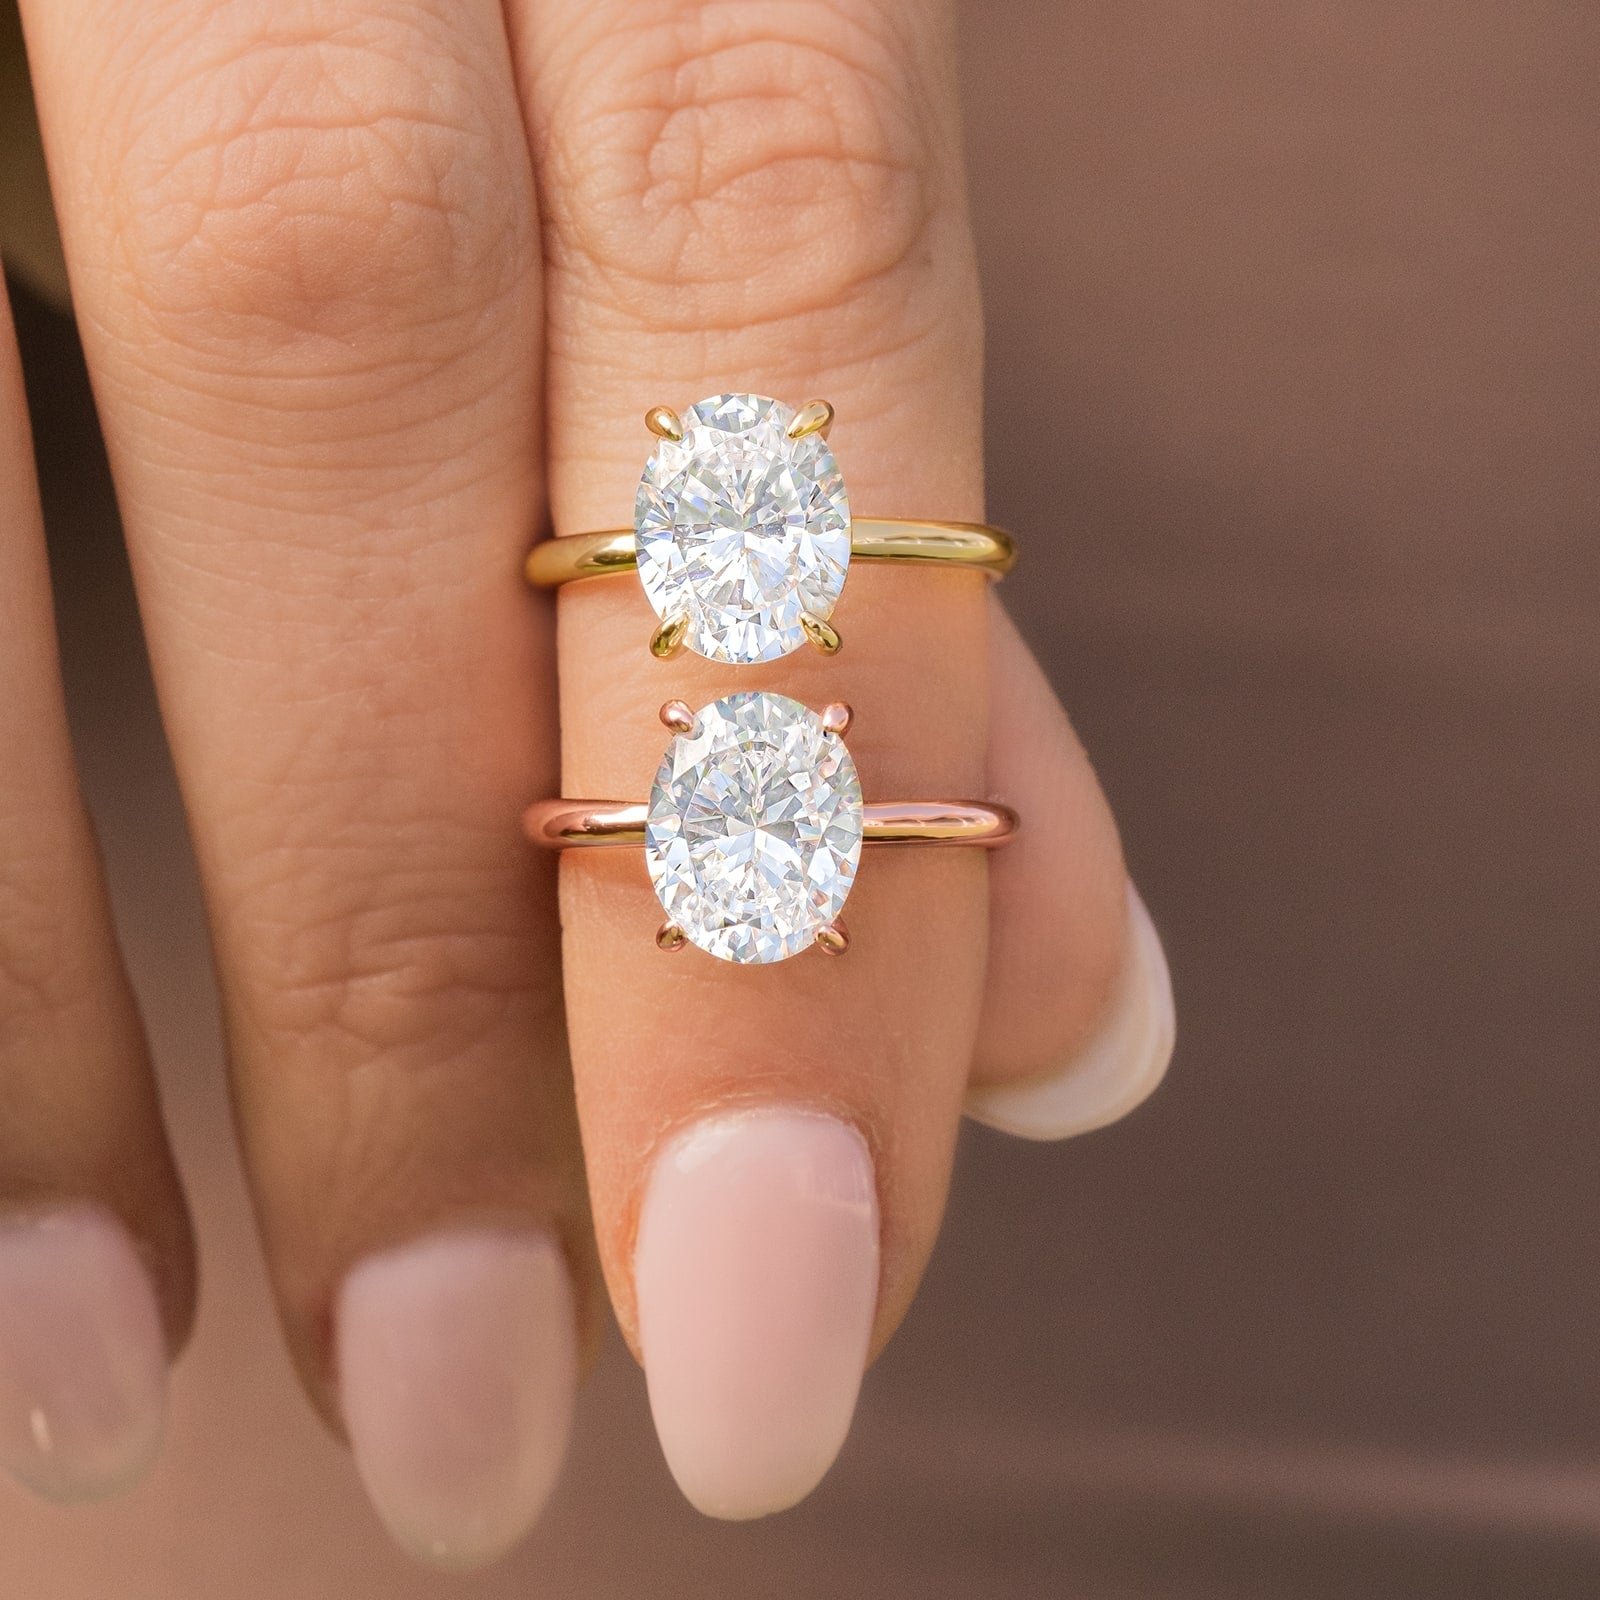 Best Bridal Jewelry: 5 Stunning Collections - Blog | Ballantyne Jewelers